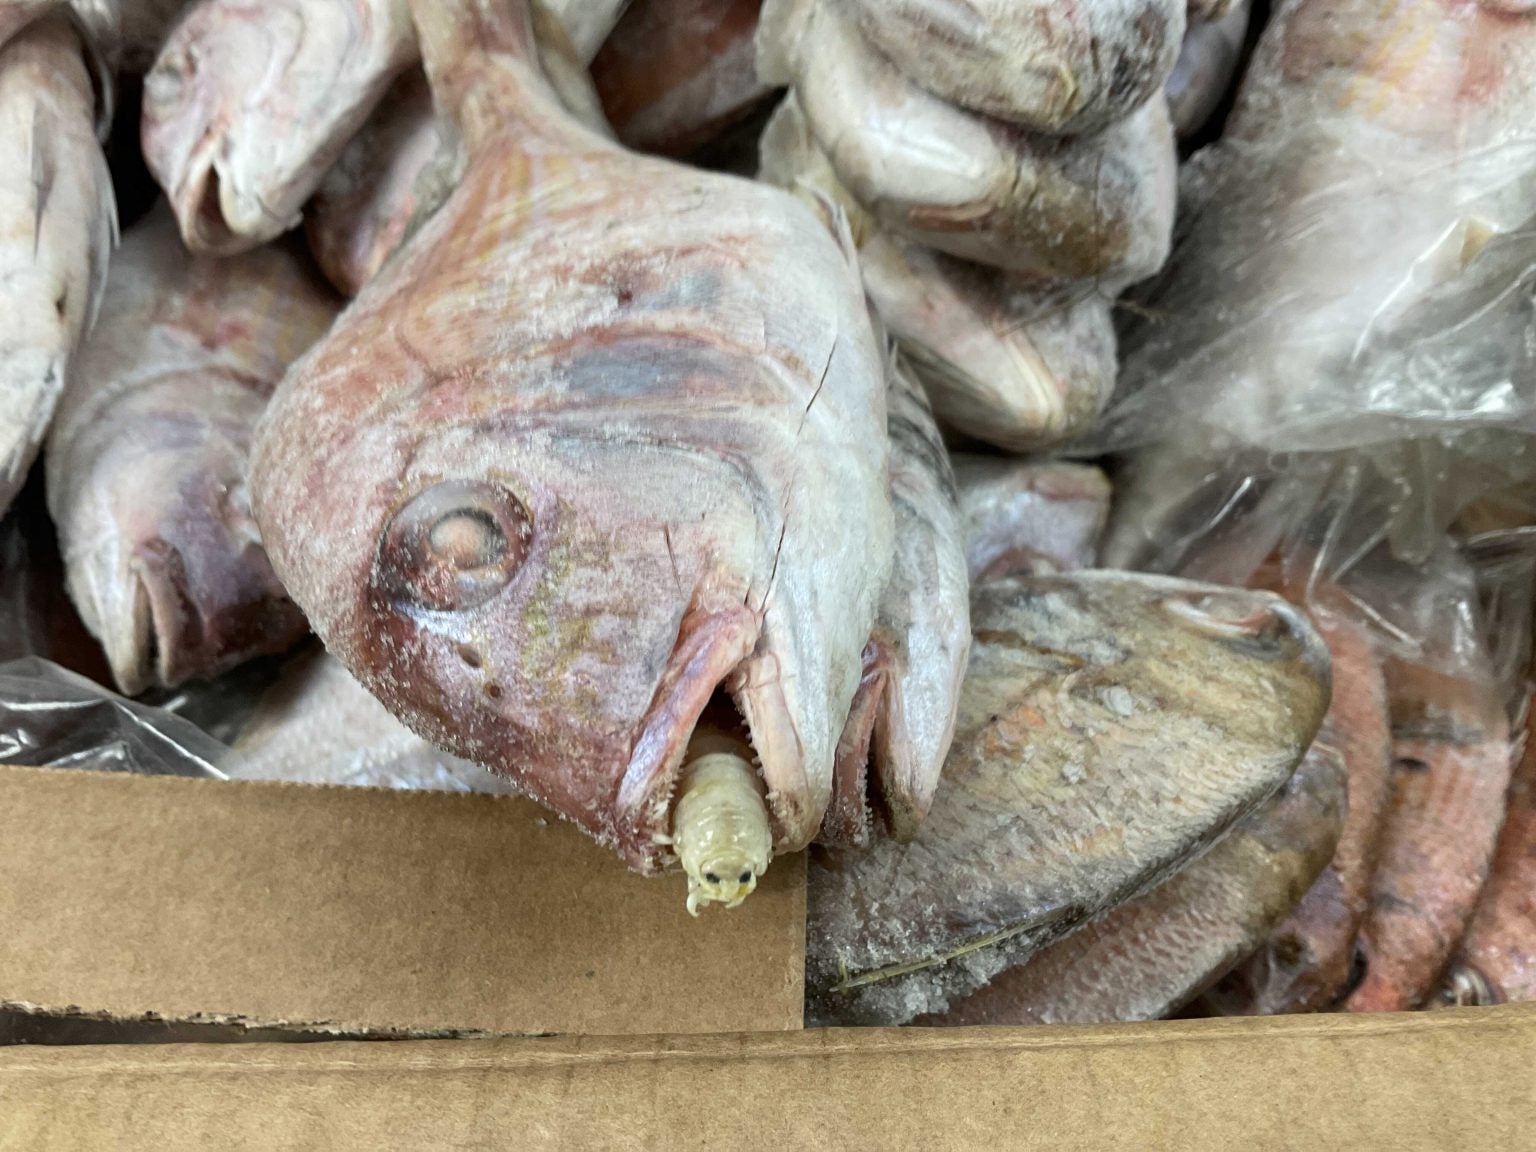 The parasites were discovered in a container of imported seabream during a routine health check